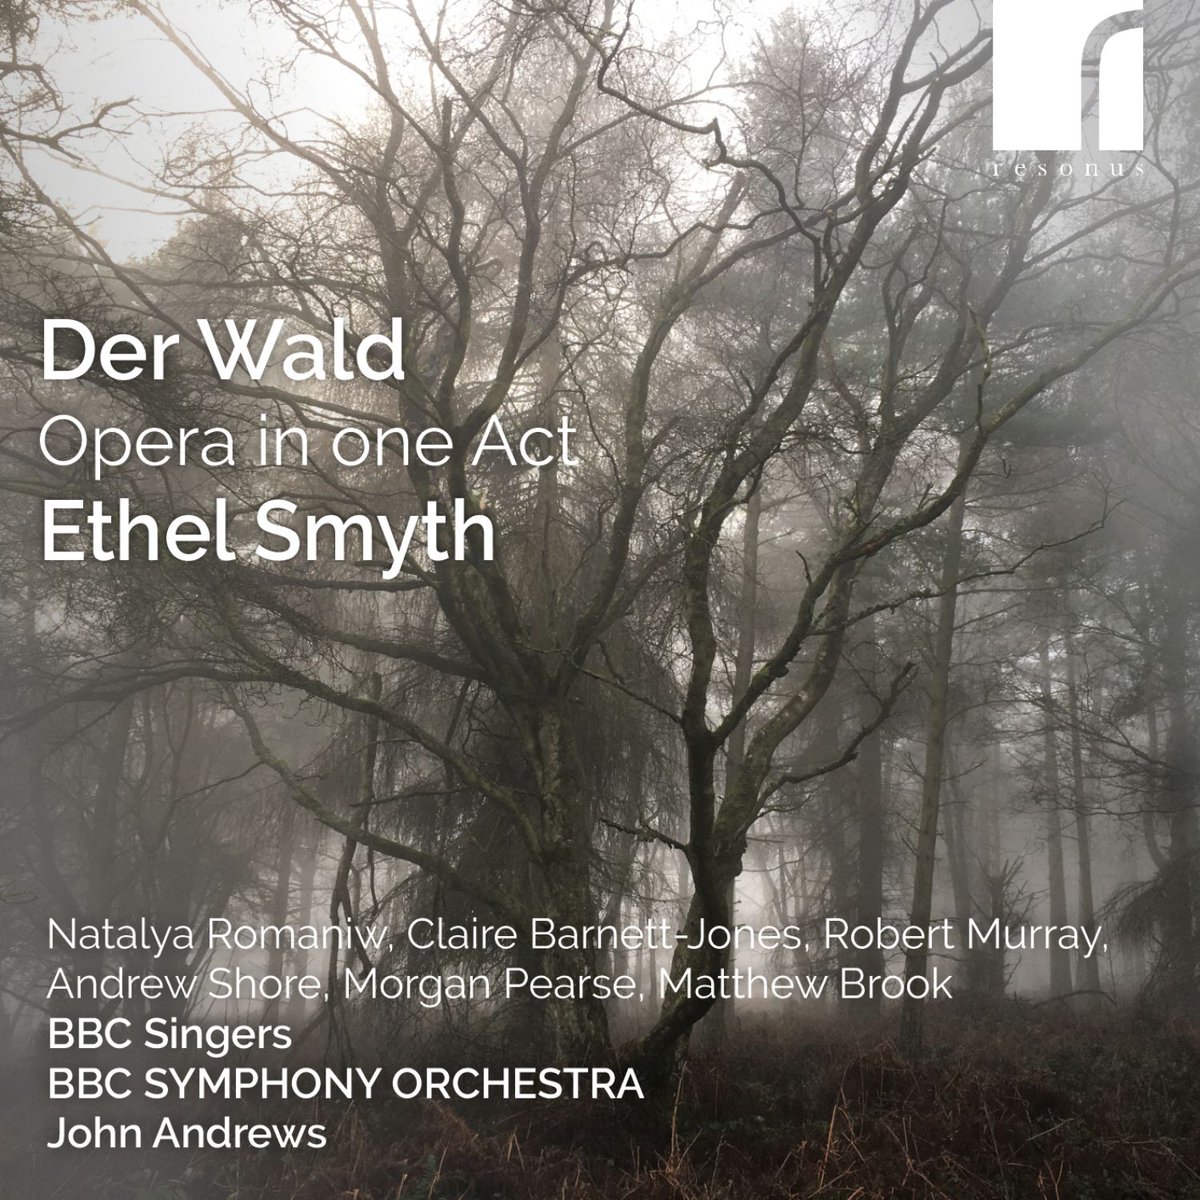 Our #discoftheweek is the long overdue first recording of Ethel Smyth's 1902 one-act opera Der Wald. @JKAConductor directs a strong cast and BBC forces in this revelatory performance, a must for lovers of early 20th-century opera. Read our review here... tinyurl.com/4b4xkd6h